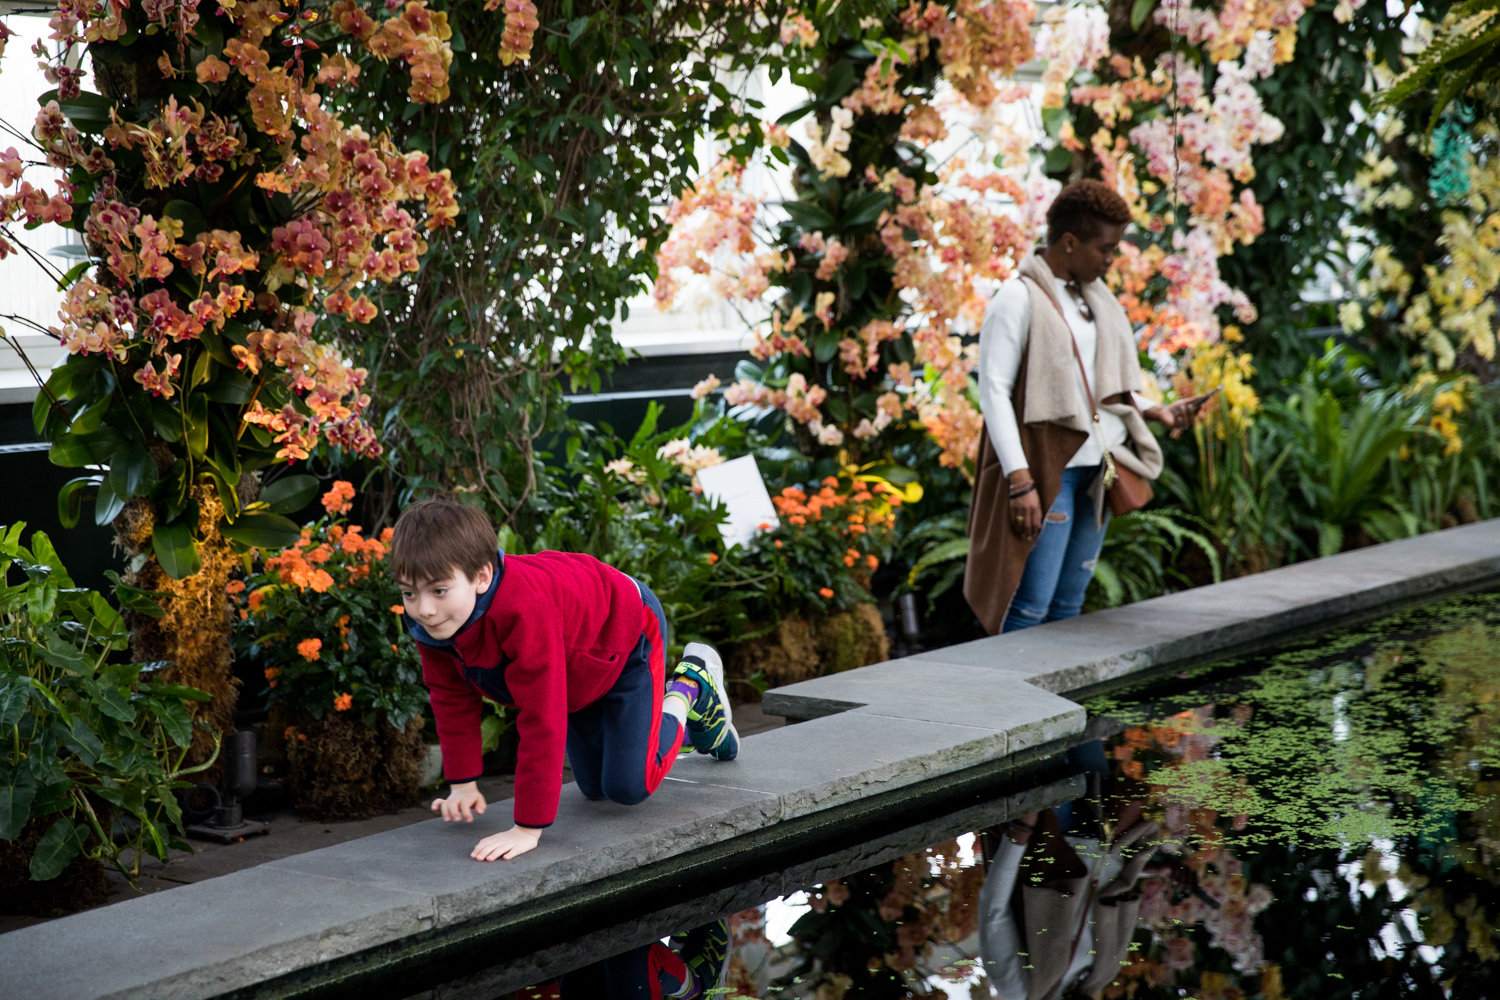 Visitors explore ‘The Orchid Show’ in the Enid A. Haupt Conservatory at the New York Botanical Garden.